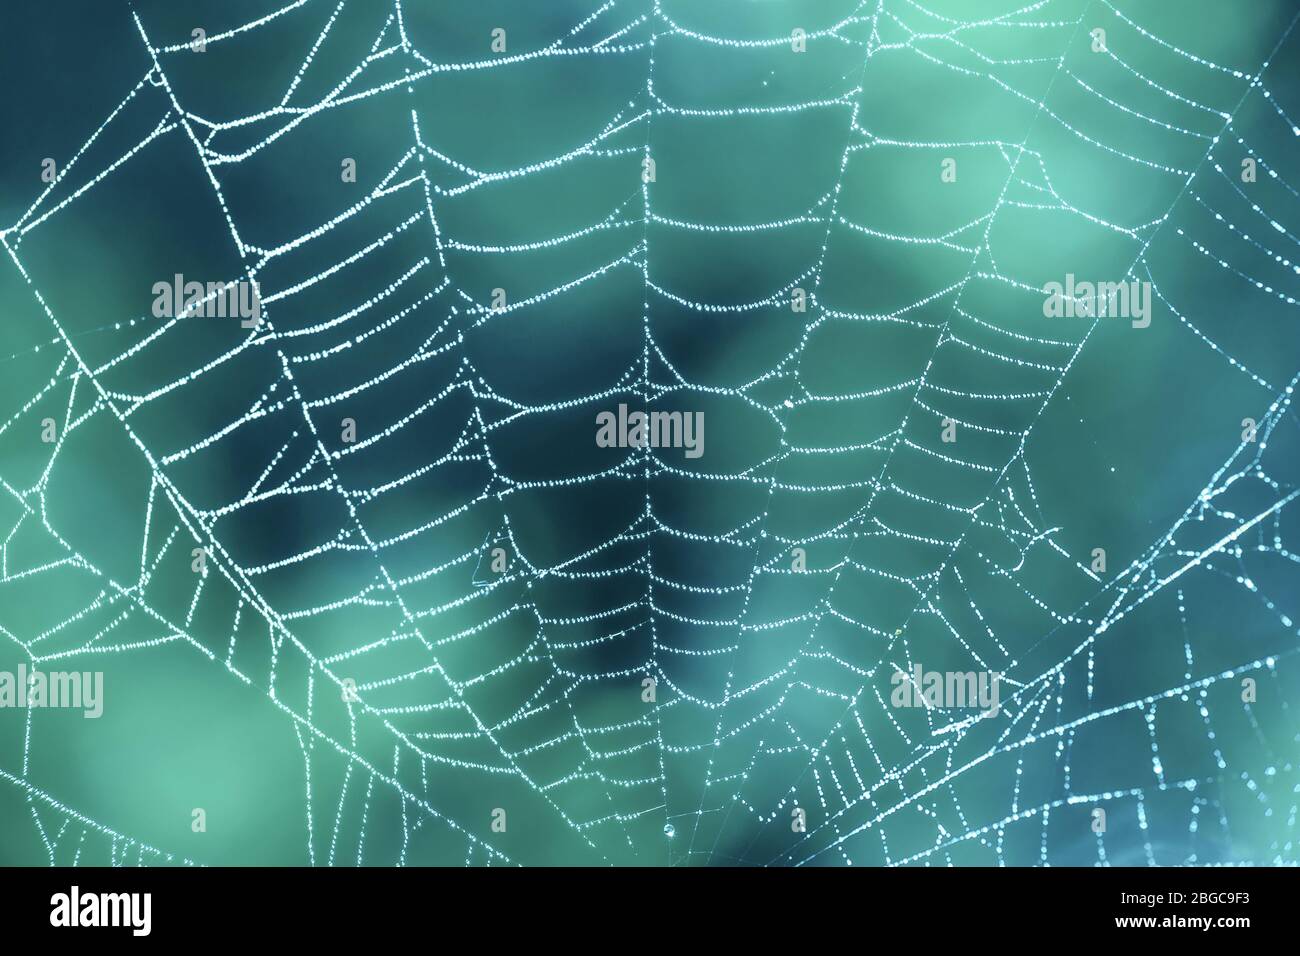 Spider web close up with dew drops on blue teal background Stock Photo